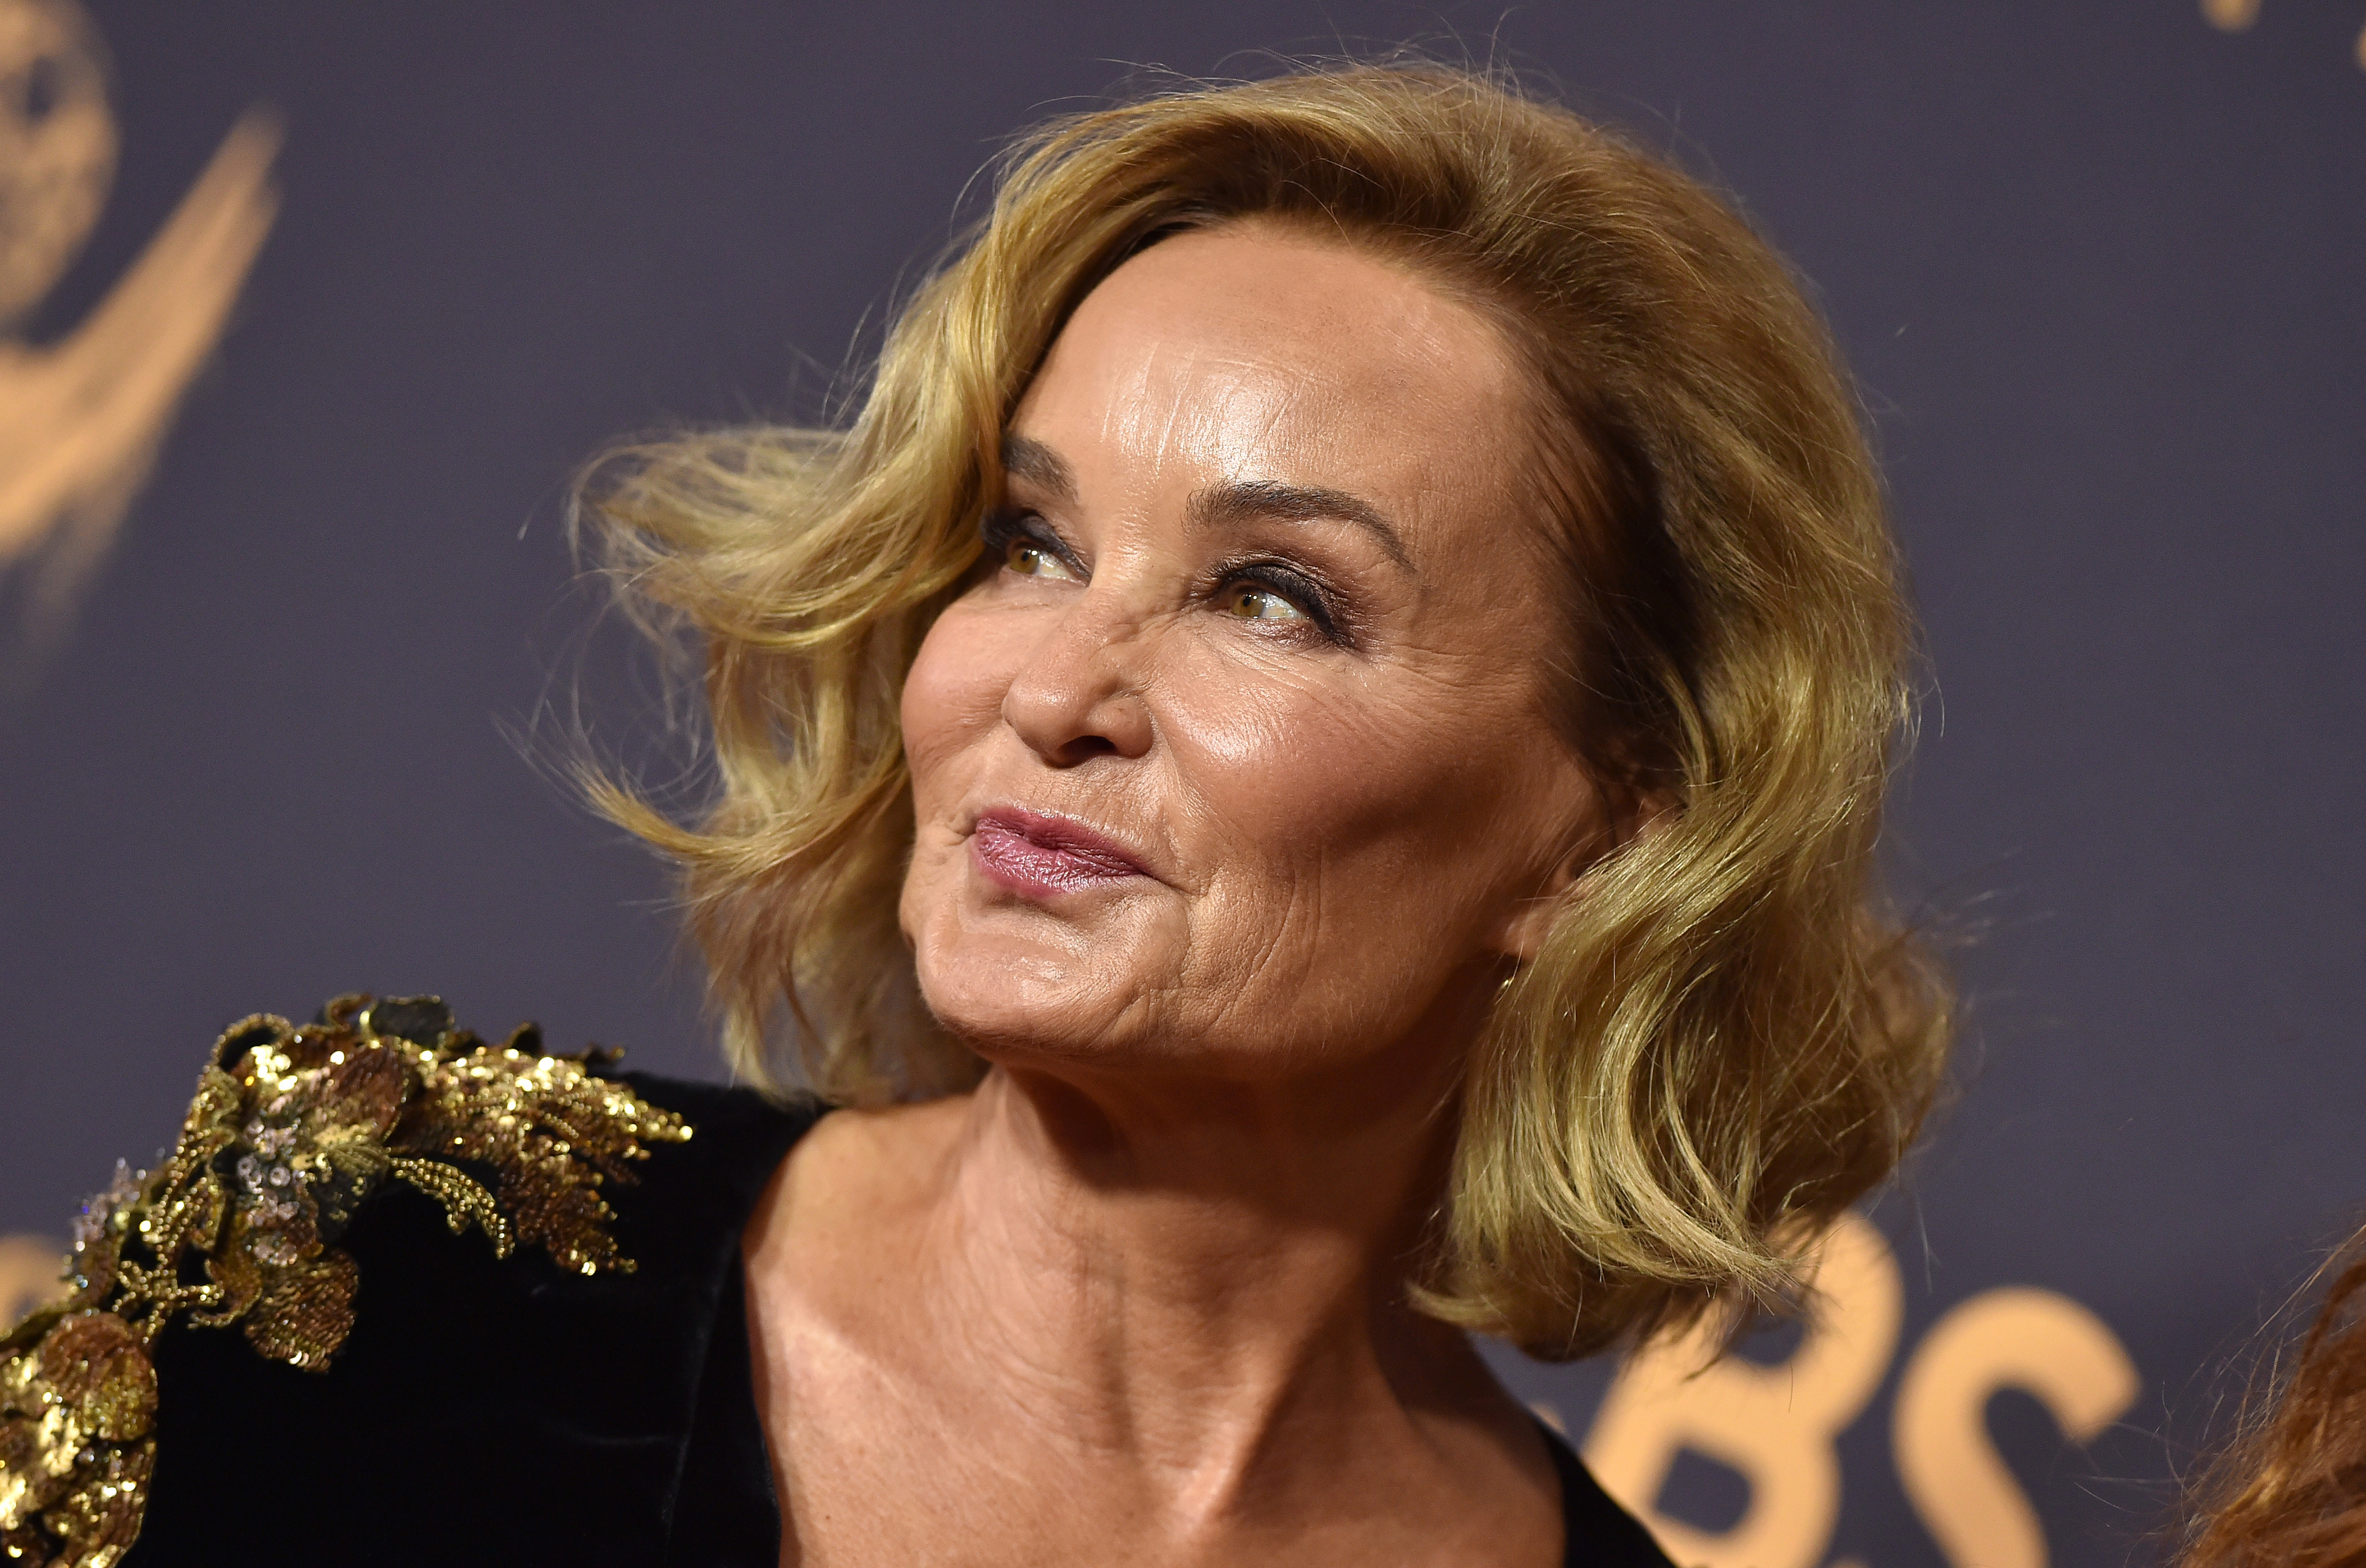 Jessica Lange arrives at the 69th Annual Primetime Emmy Awards at Microsoft Theater on September 17, 2017 in Los Angeles, California. | Source: Getty Images